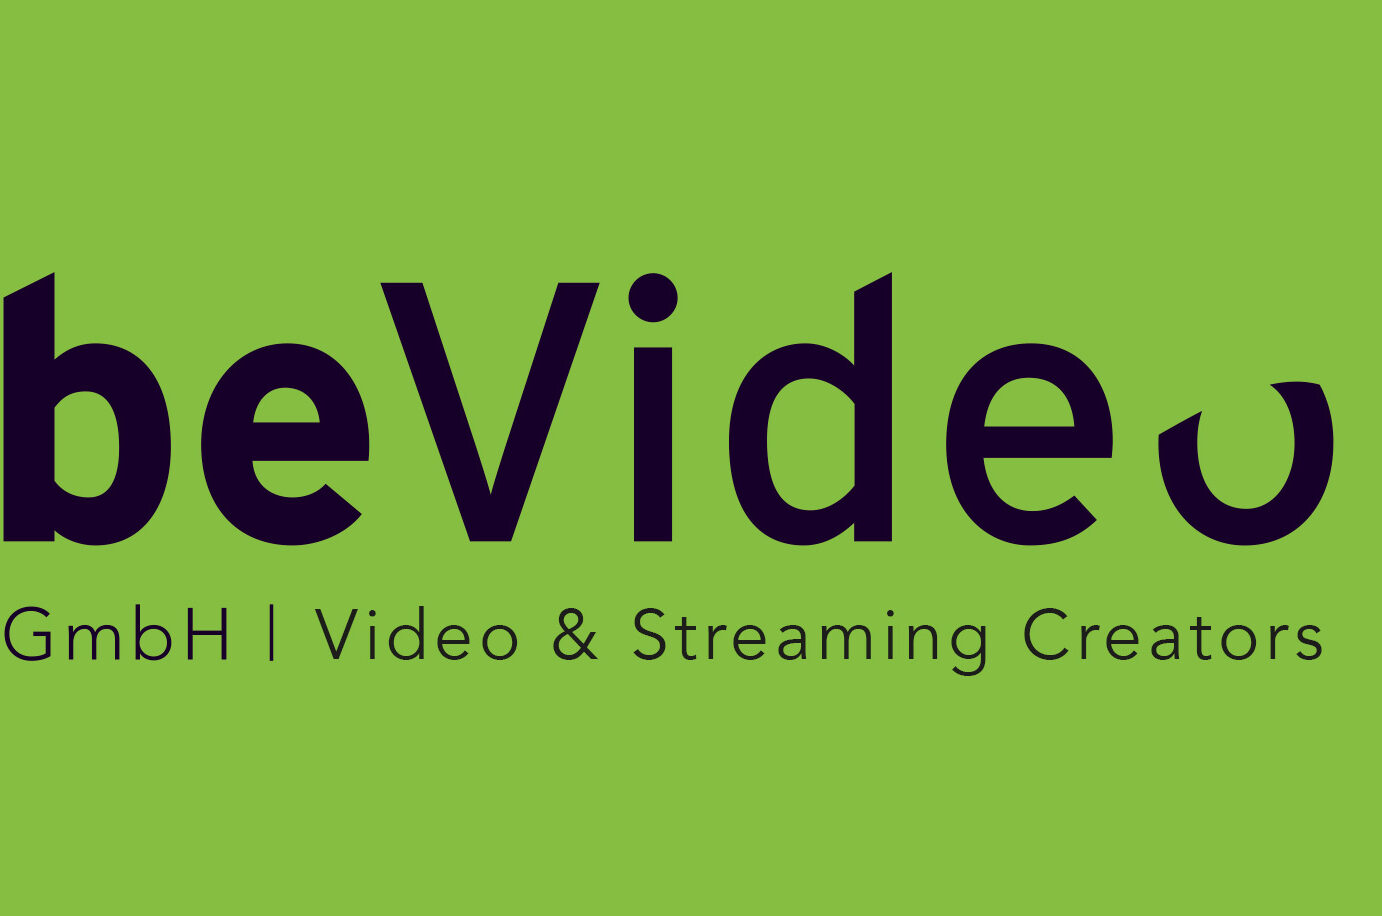 (c) Bevideo.at